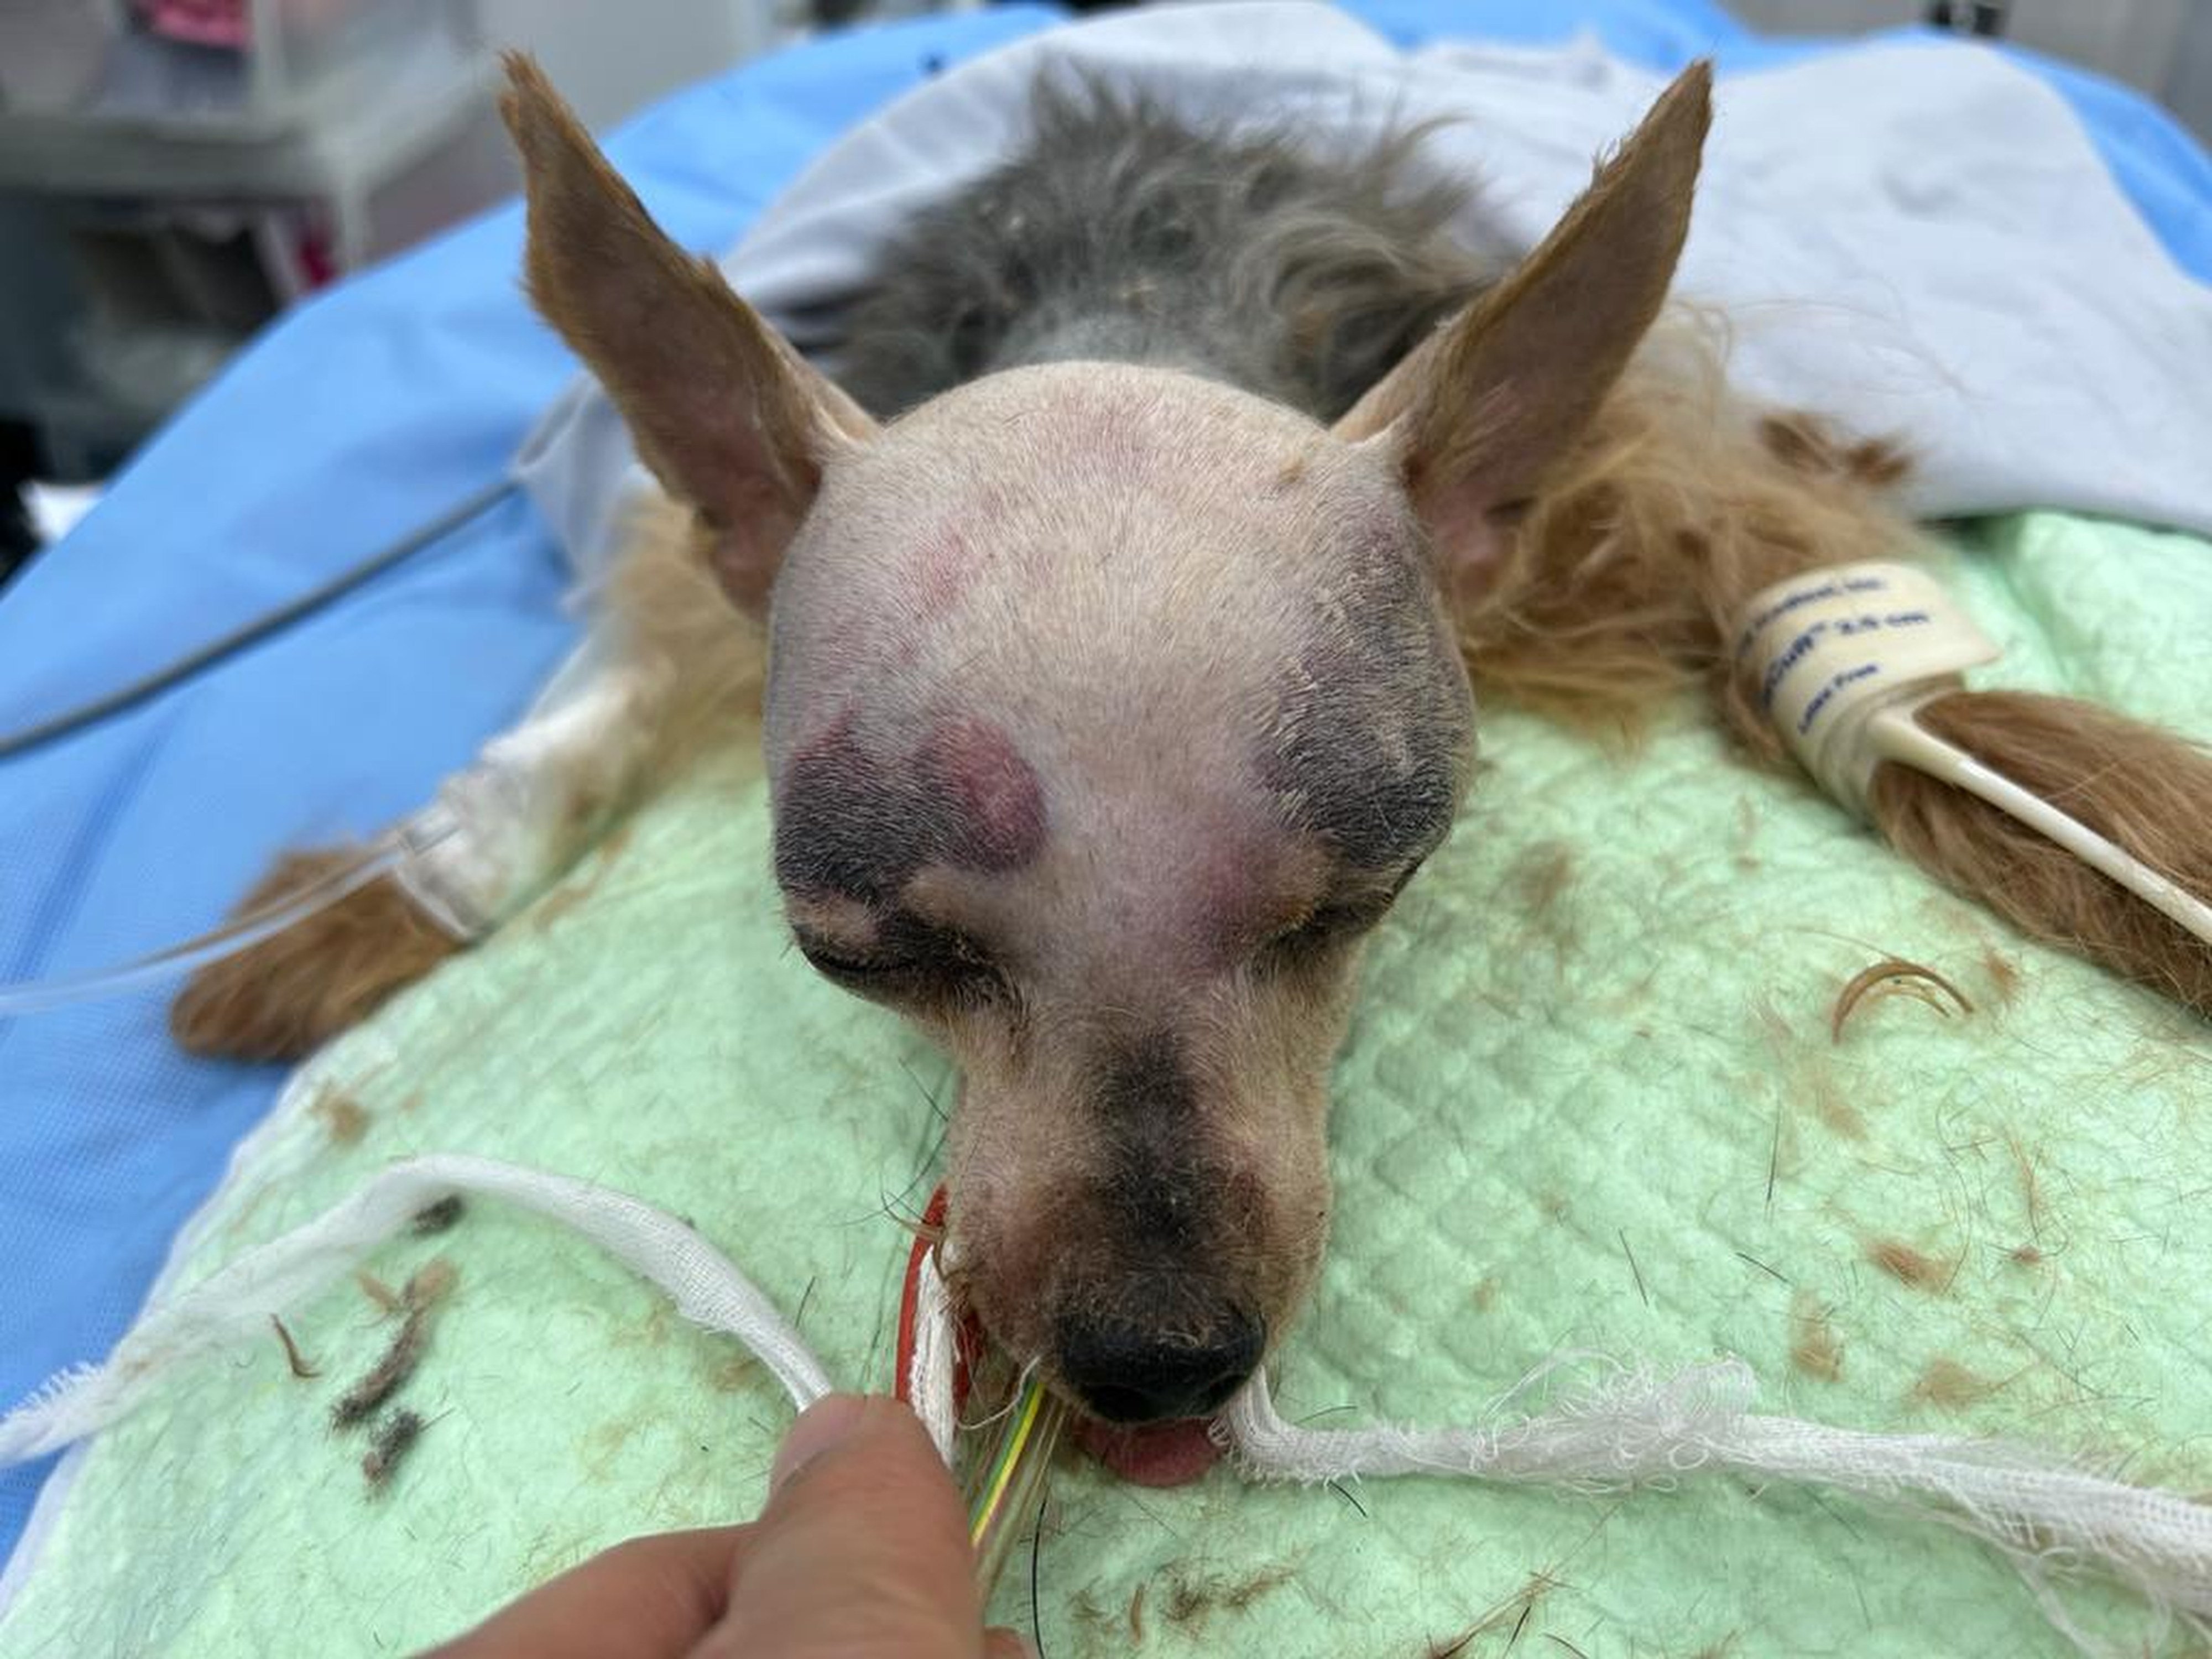 The terrier required immediate surgery after it was brought to an animal charity. Photo: Facebook/Non-Profit Making Veterinary Services Society